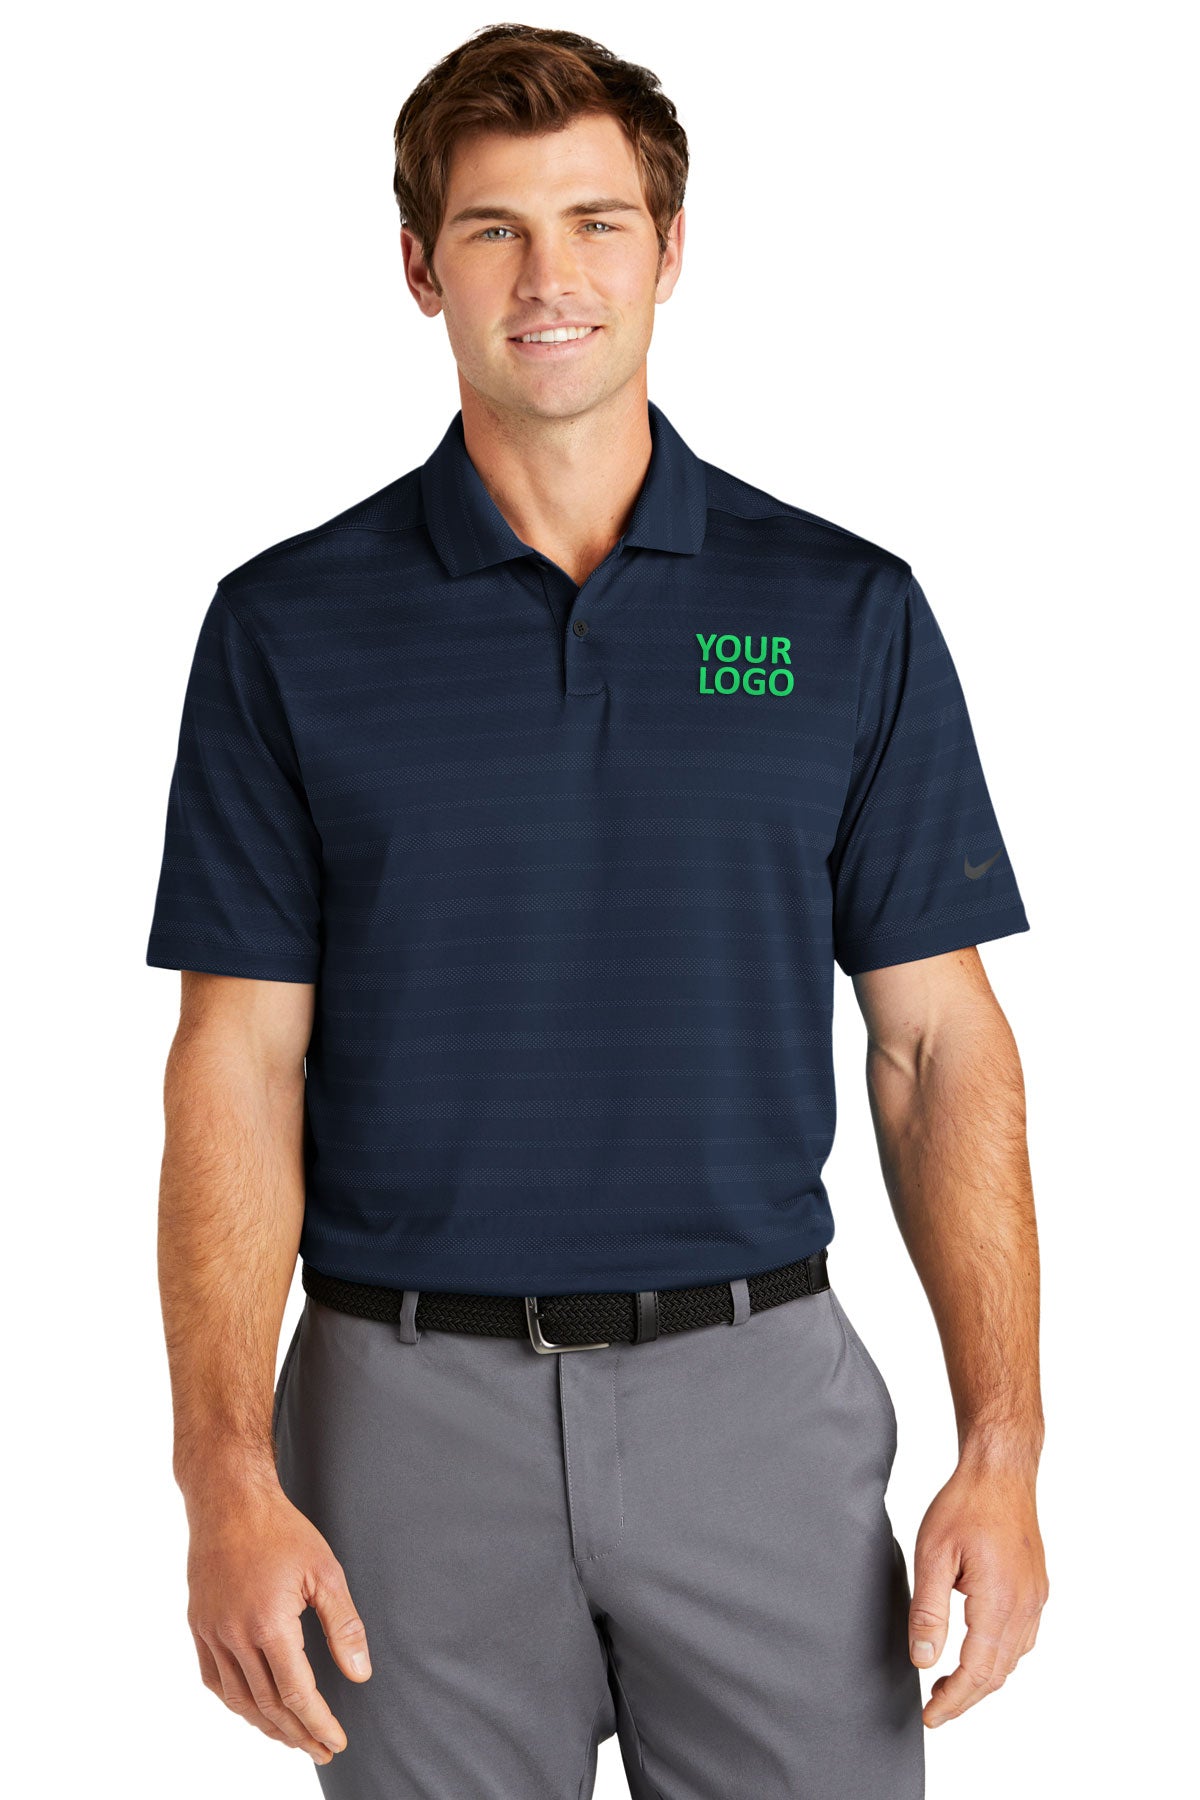 Nike Navy NKDC2115 polo shirts with logos